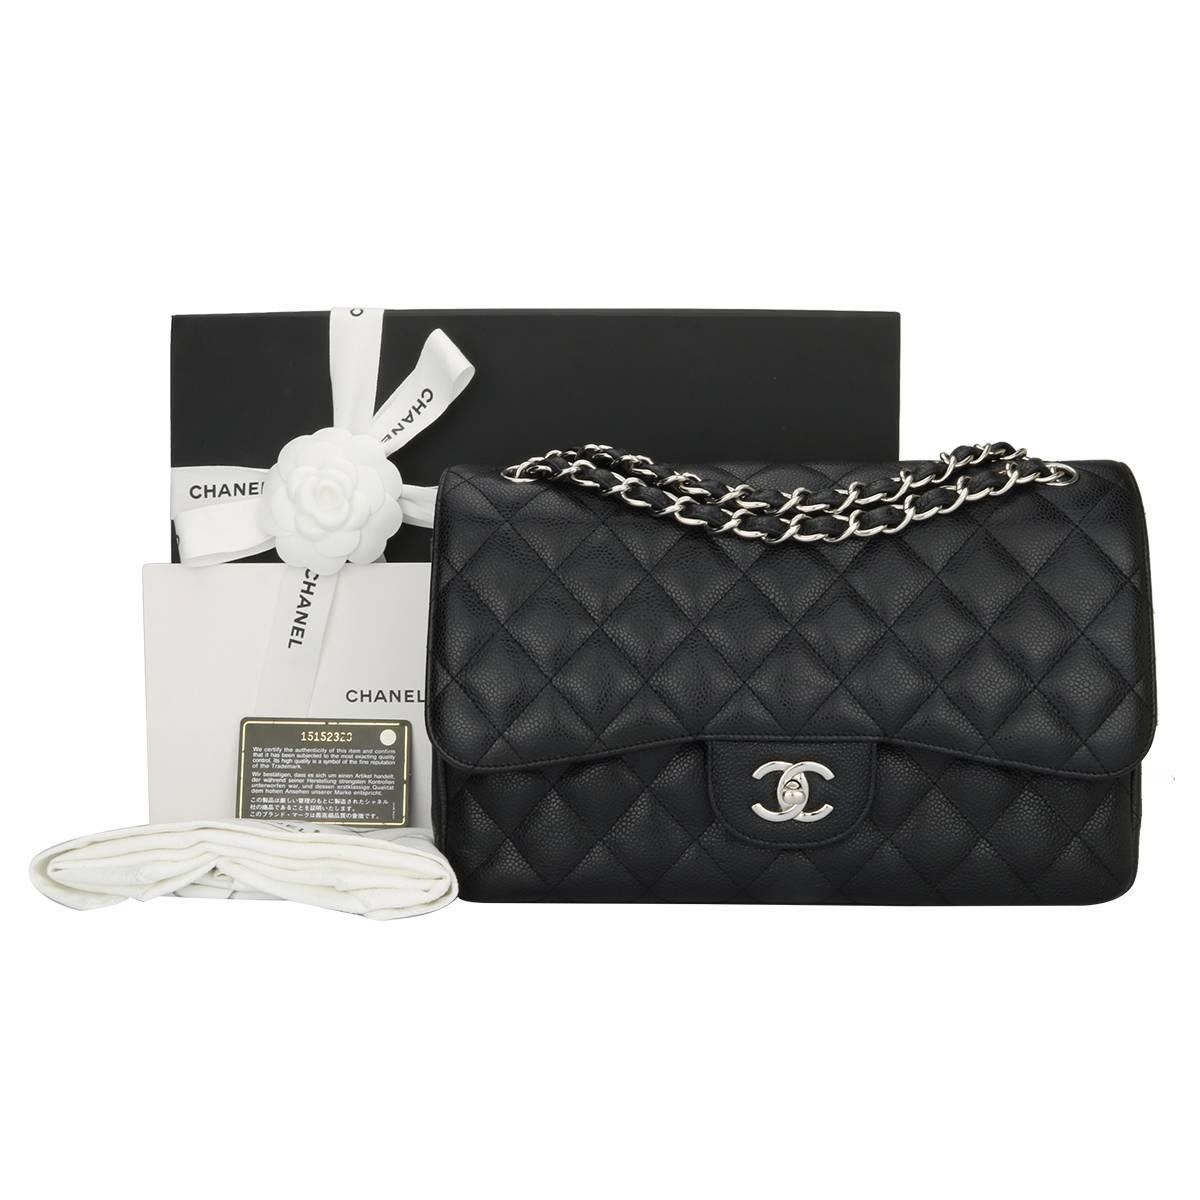 Authentic CHANEL Classic Jumbo Double Flap Black Caviar with Silver Hardware 2014.

This stunning bag is in an excellent condition, the bag still holds its original shape, and the hardware is still very shiny.

Exterior Condition: Excellent